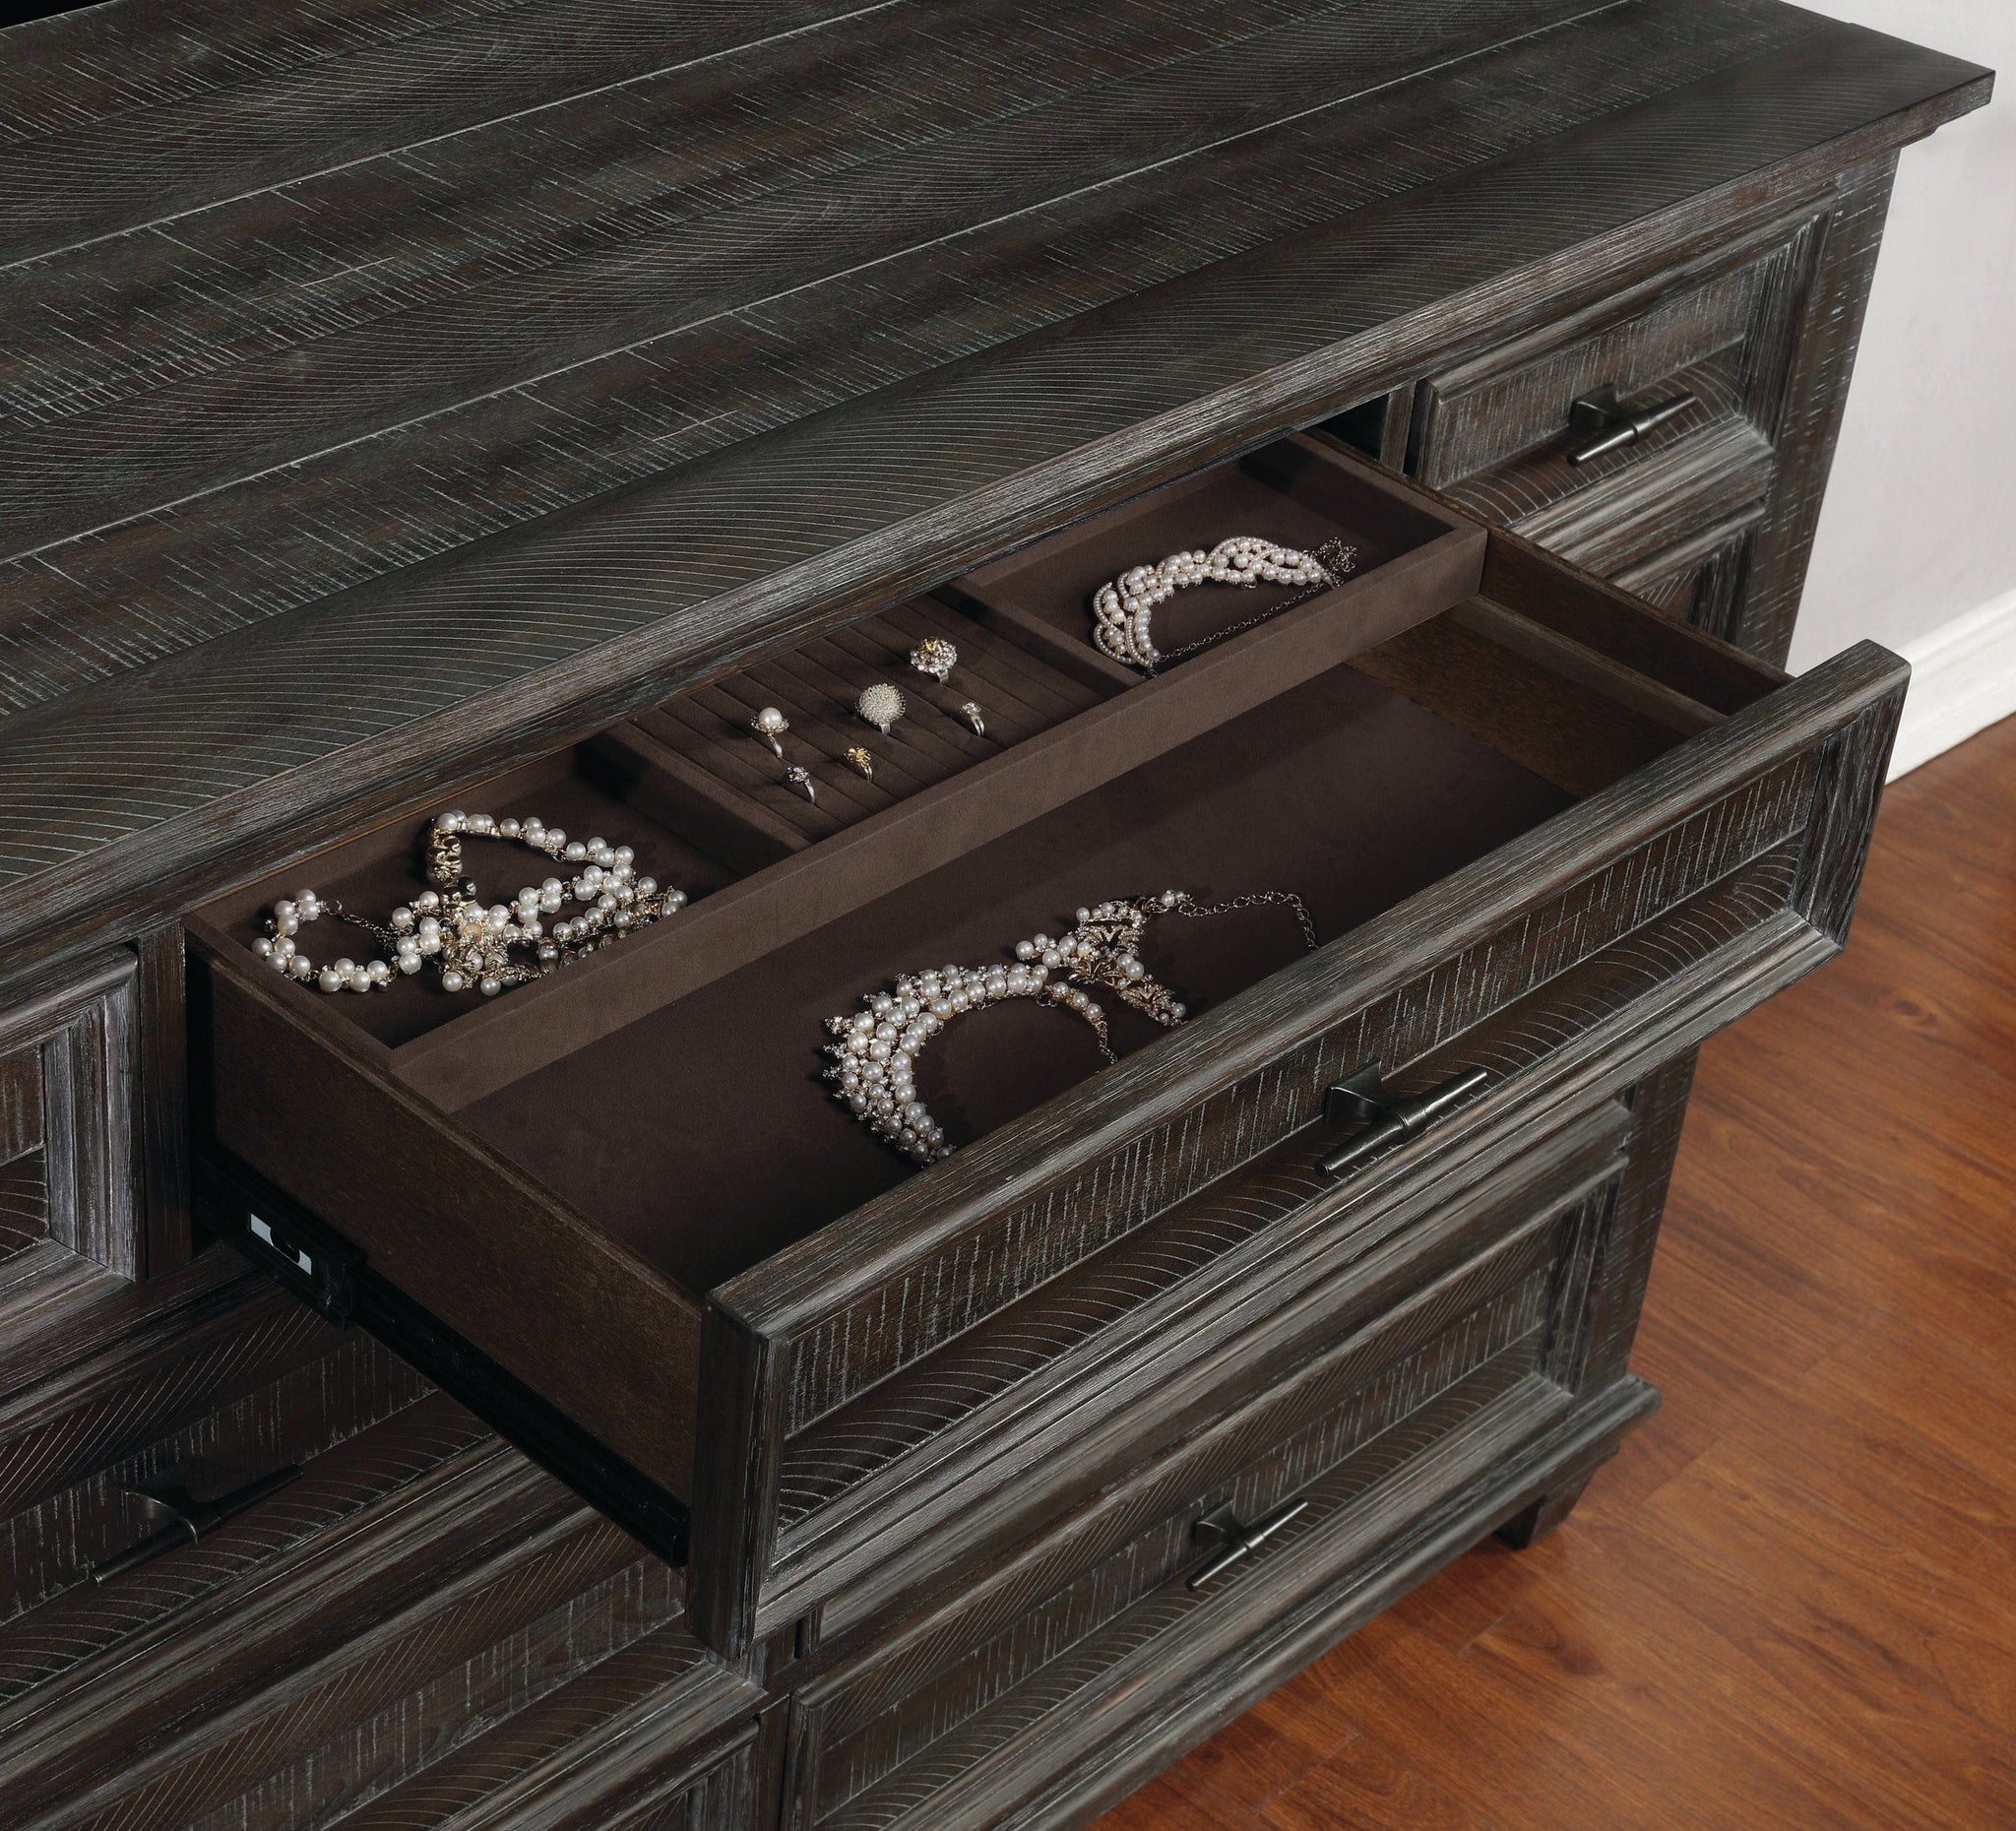 Atascadero 9-Drawer Dresser Weathered Carbon Collection: Cultivate Your Own Unique Bedroom Layout With This Dresser, Exquisite Vineyard Inspired Design Comes To Life In Weathered Carbon Finish. SKU: 222883